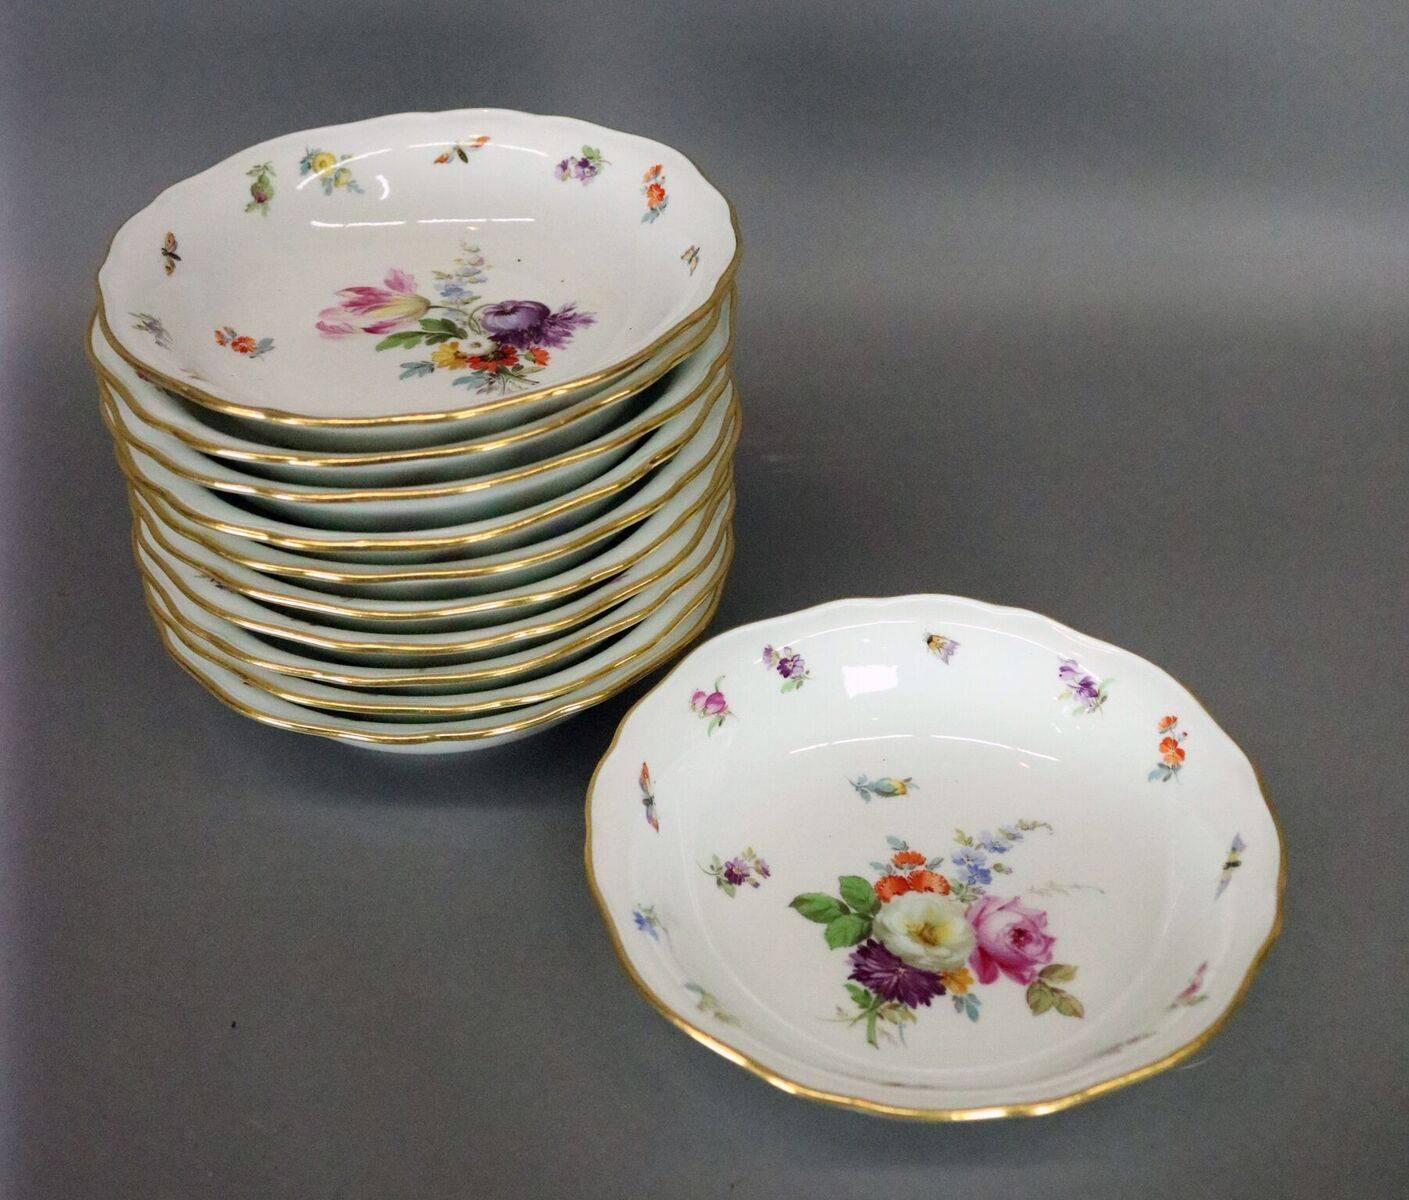 56 Piece Antique Hand-Painted Meissen Dinnerware, Flowers & Insects, circa 1890 3